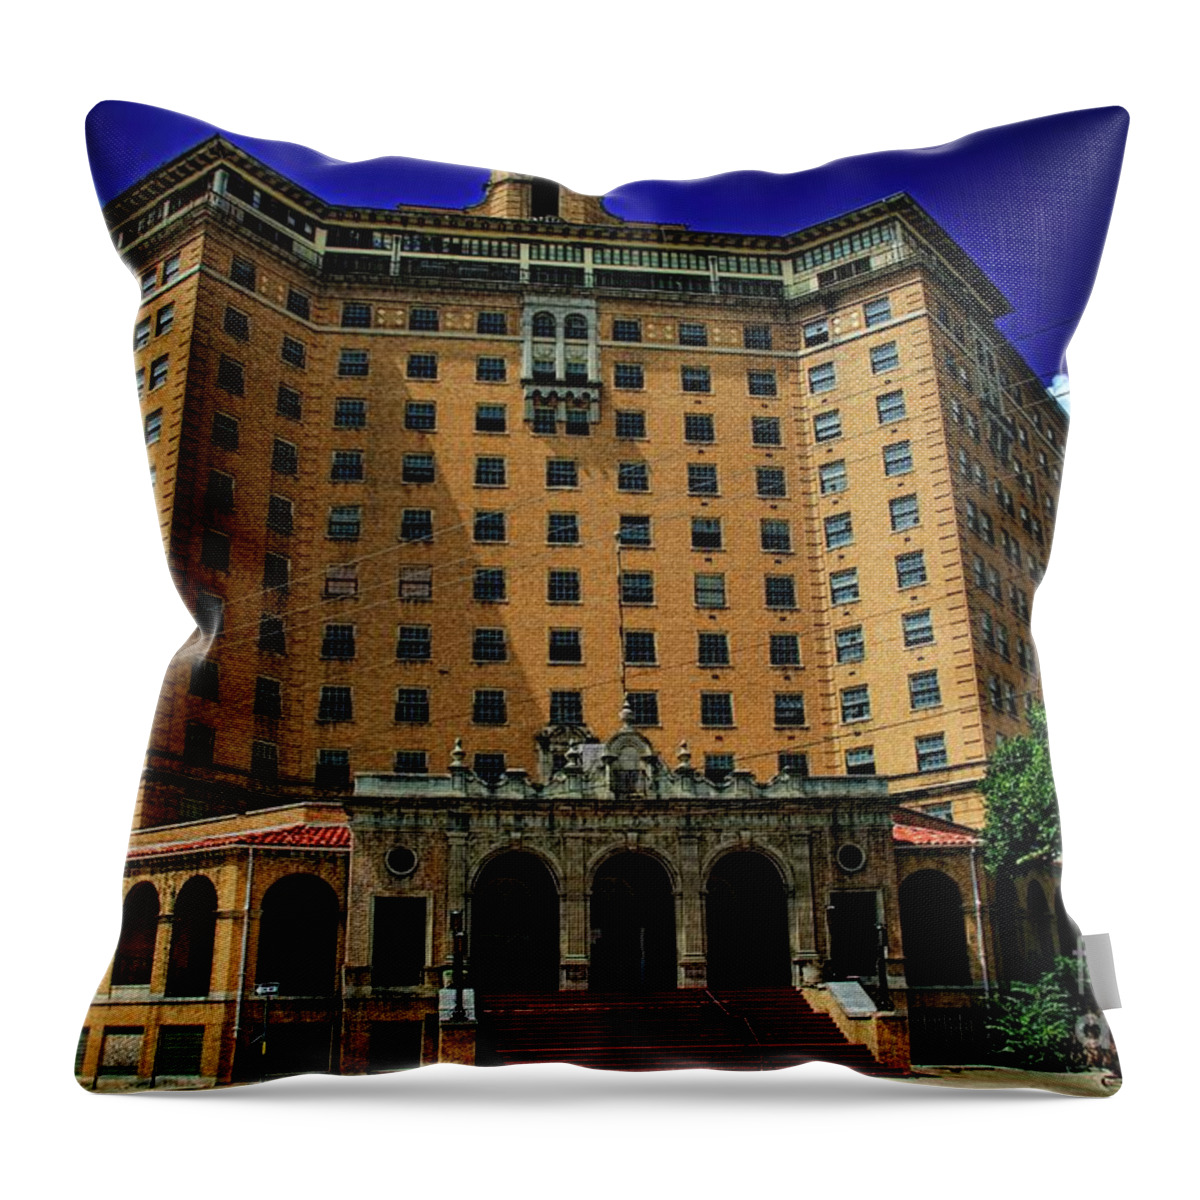 The Throw Pillow featuring the photograph Front View The Baker by Diana Mary Sharpton